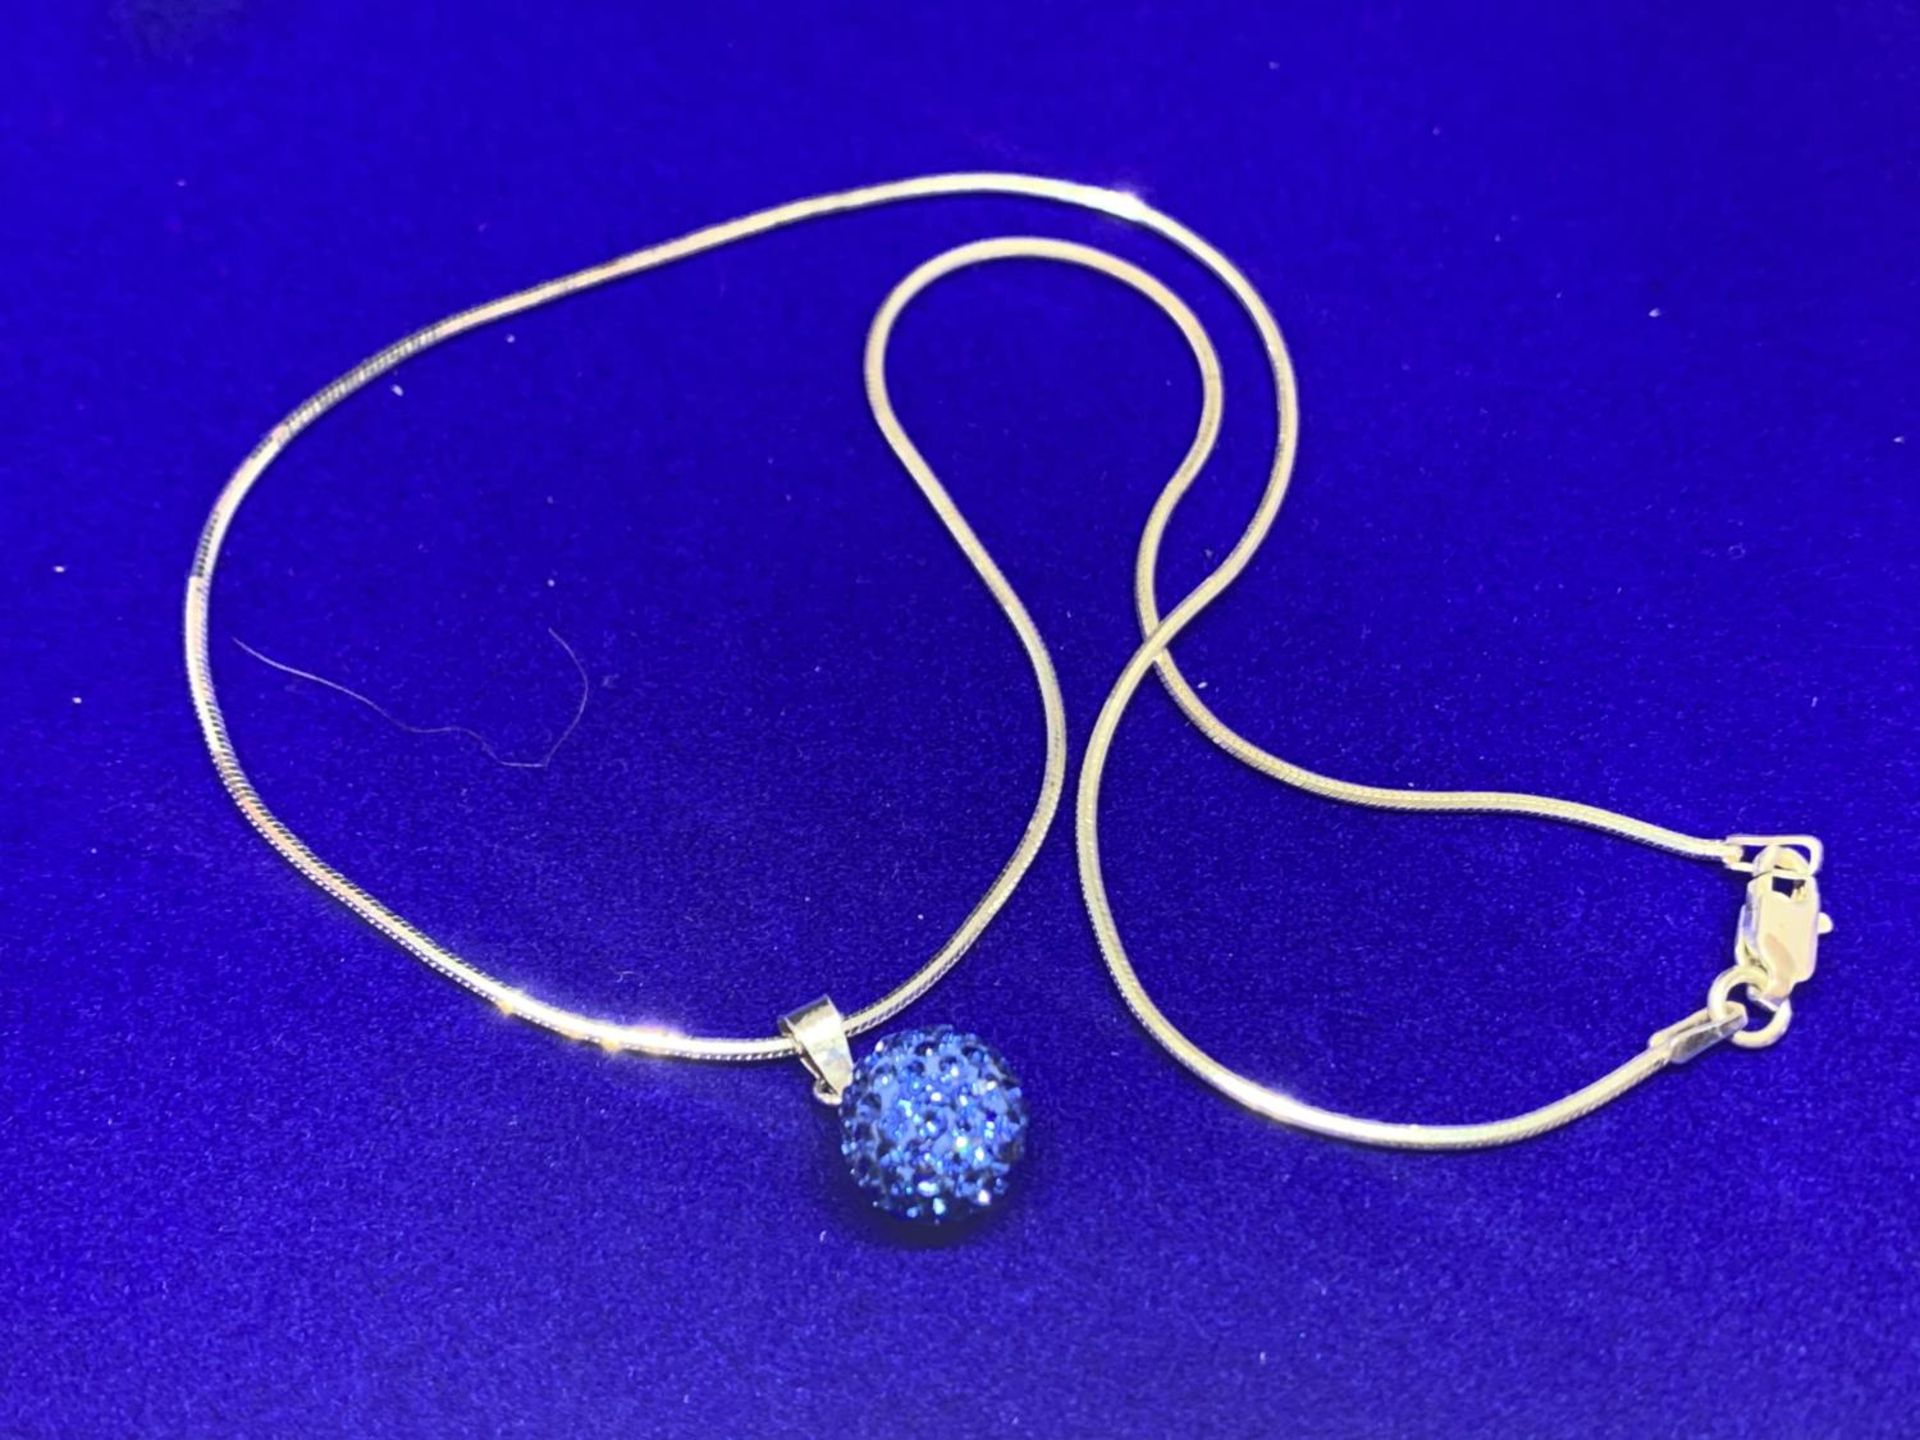 A SILVER CHAIN MARKED 925 WITH A BLUE CRYSTAL BALL PENDANT IN A PRESENTATION BOX